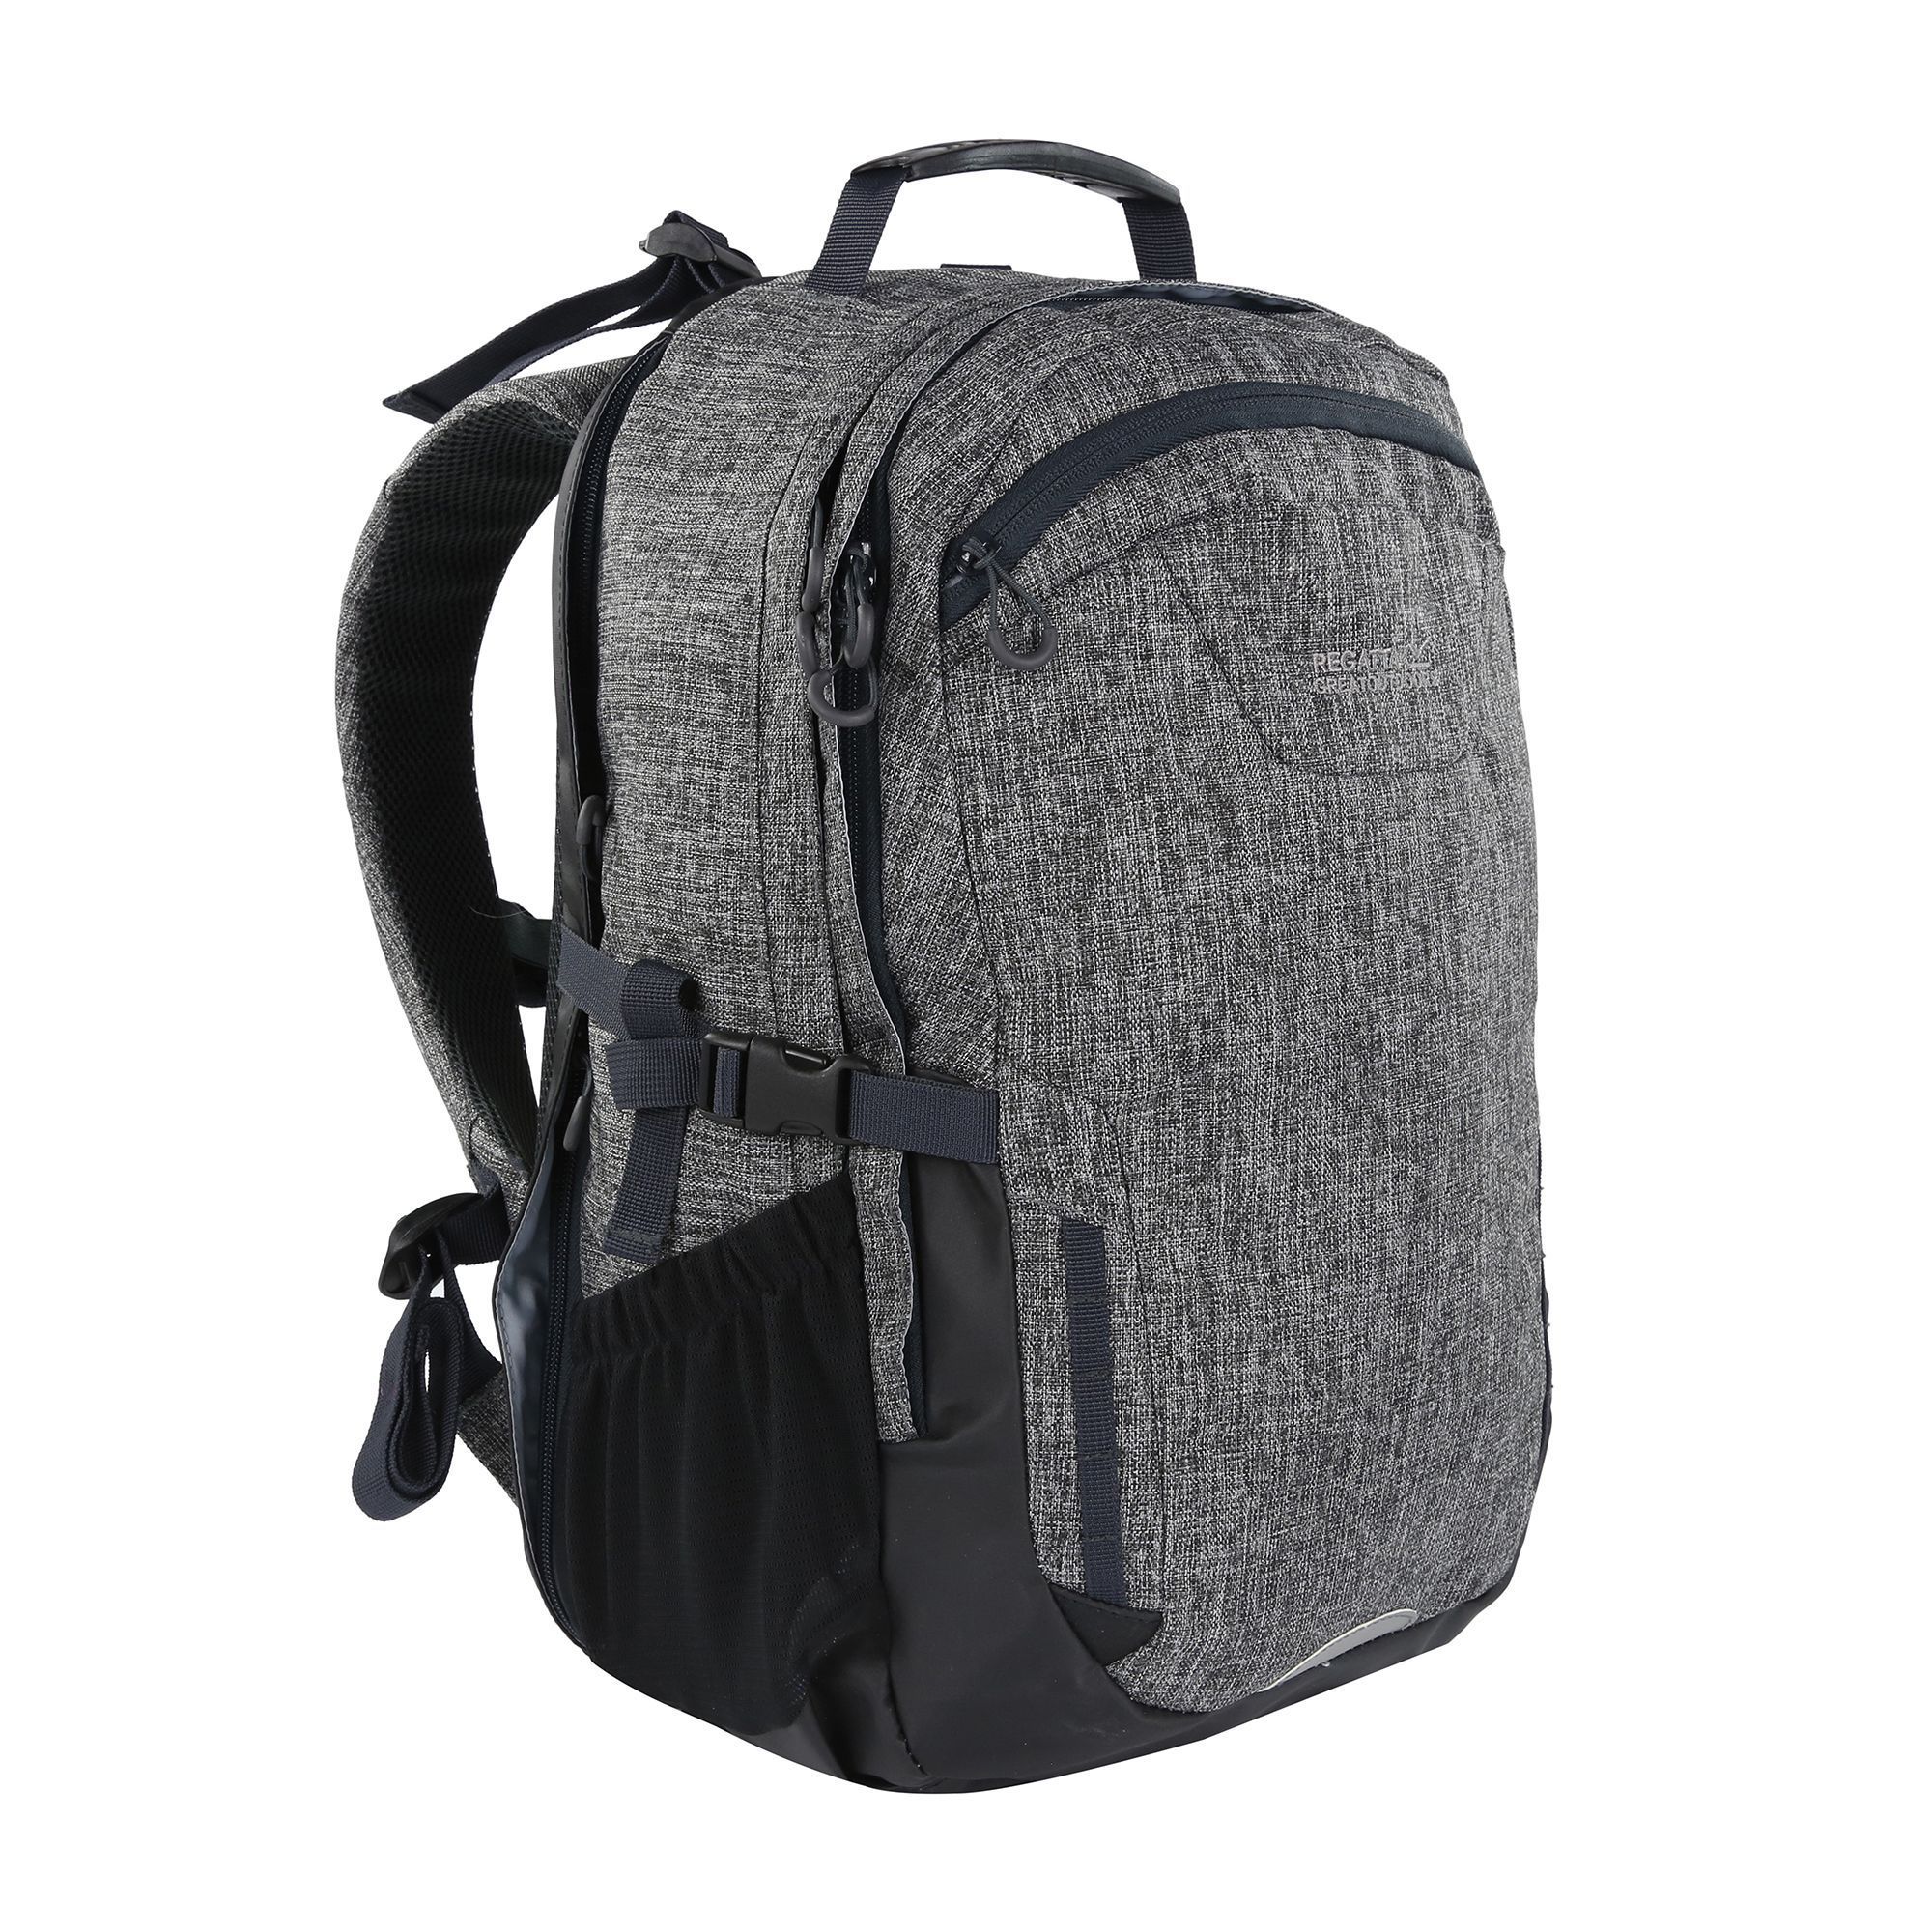 100% polyester fabric. Padded shoulder straps. Padded laptop pocket for up to 12in laptops and tablets. Lockable zips for security. Side carry handle for easy laptop access at airport security. Side compression straps provide added laptop/tablet security. 2 zipped compartments plus front pocket. Internal organiser pockets and key clip. Reflective detail for enhanced visibility. Air mesh back construction to allow ventilated airflow. Load adjustment straps. Adjustable sliding chest harness. Mesh side pockets. Reinforced carry handle. Easy grab zip pullers. Detachable raincover.